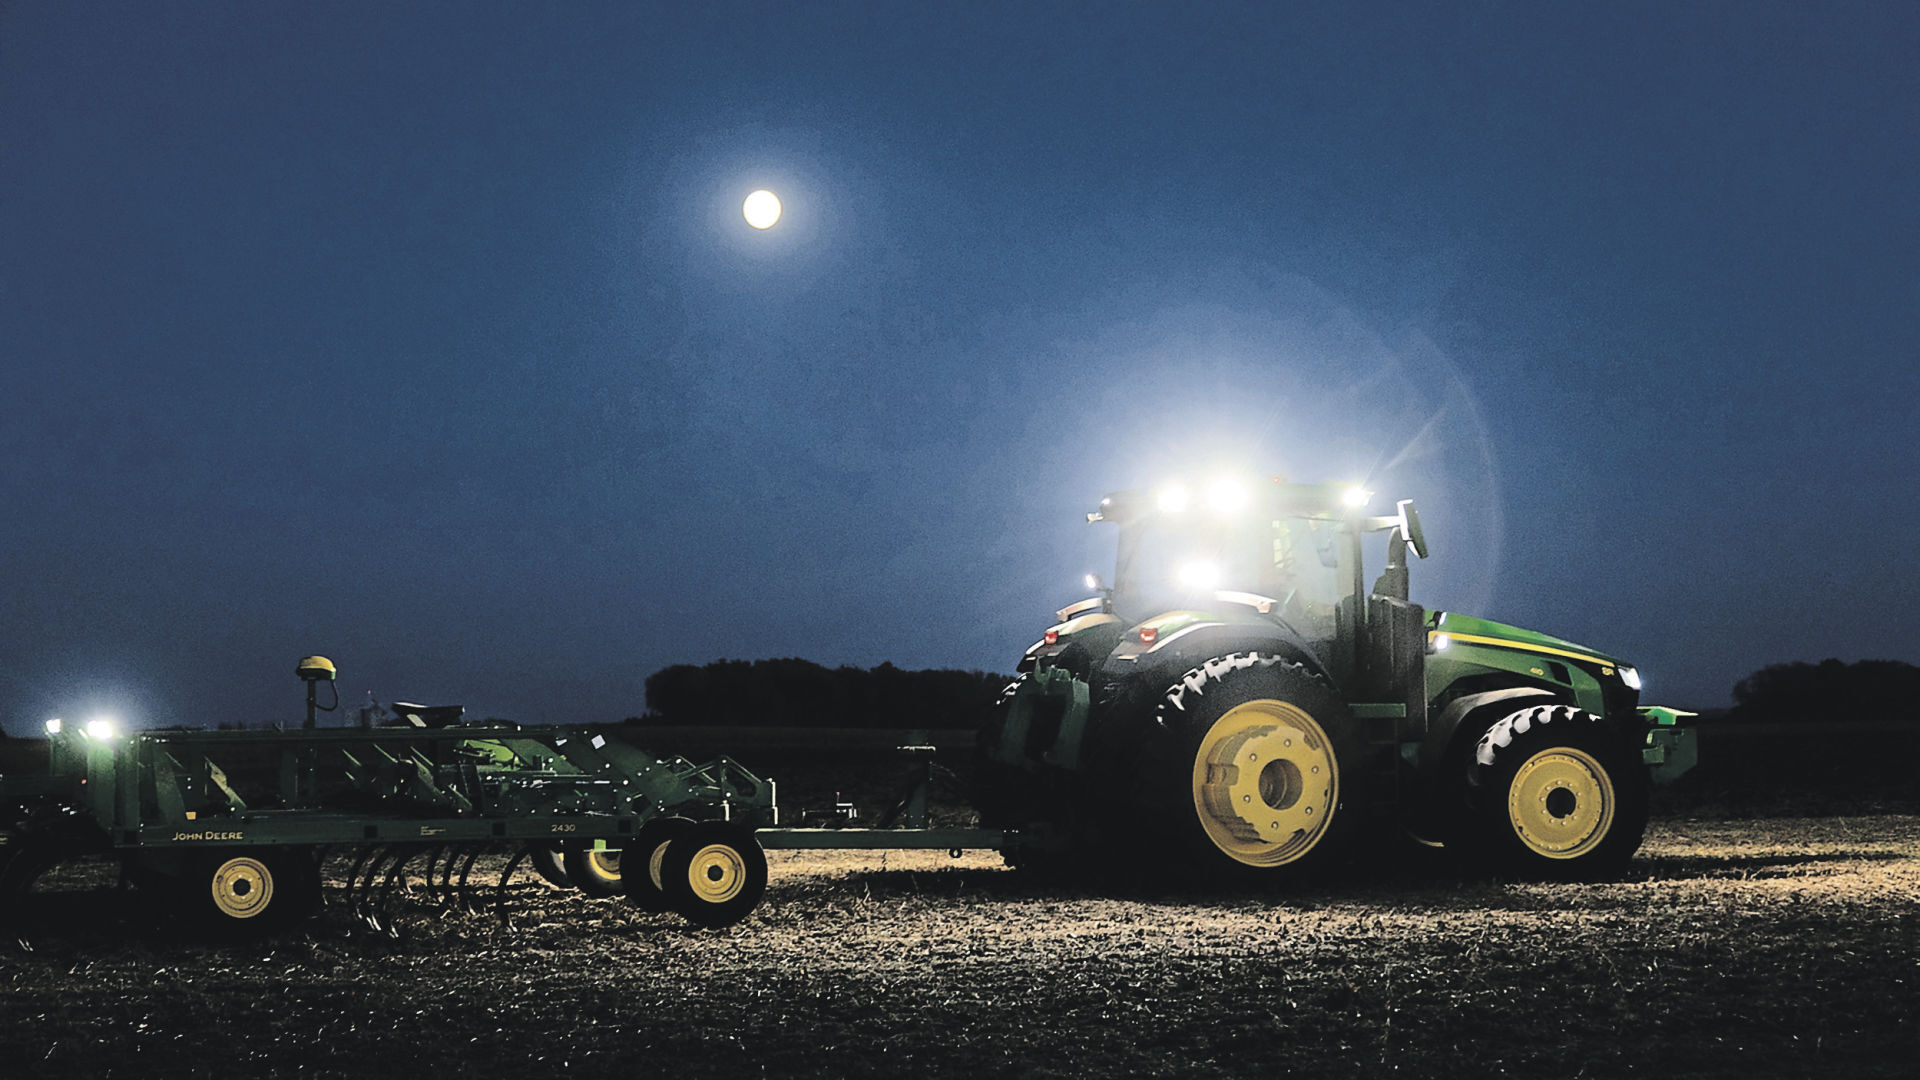 Autonomous tractors allow work in the fields when conditions are ideal for a specific job.    PHOTO CREDIT: Bill Krzyzanowski